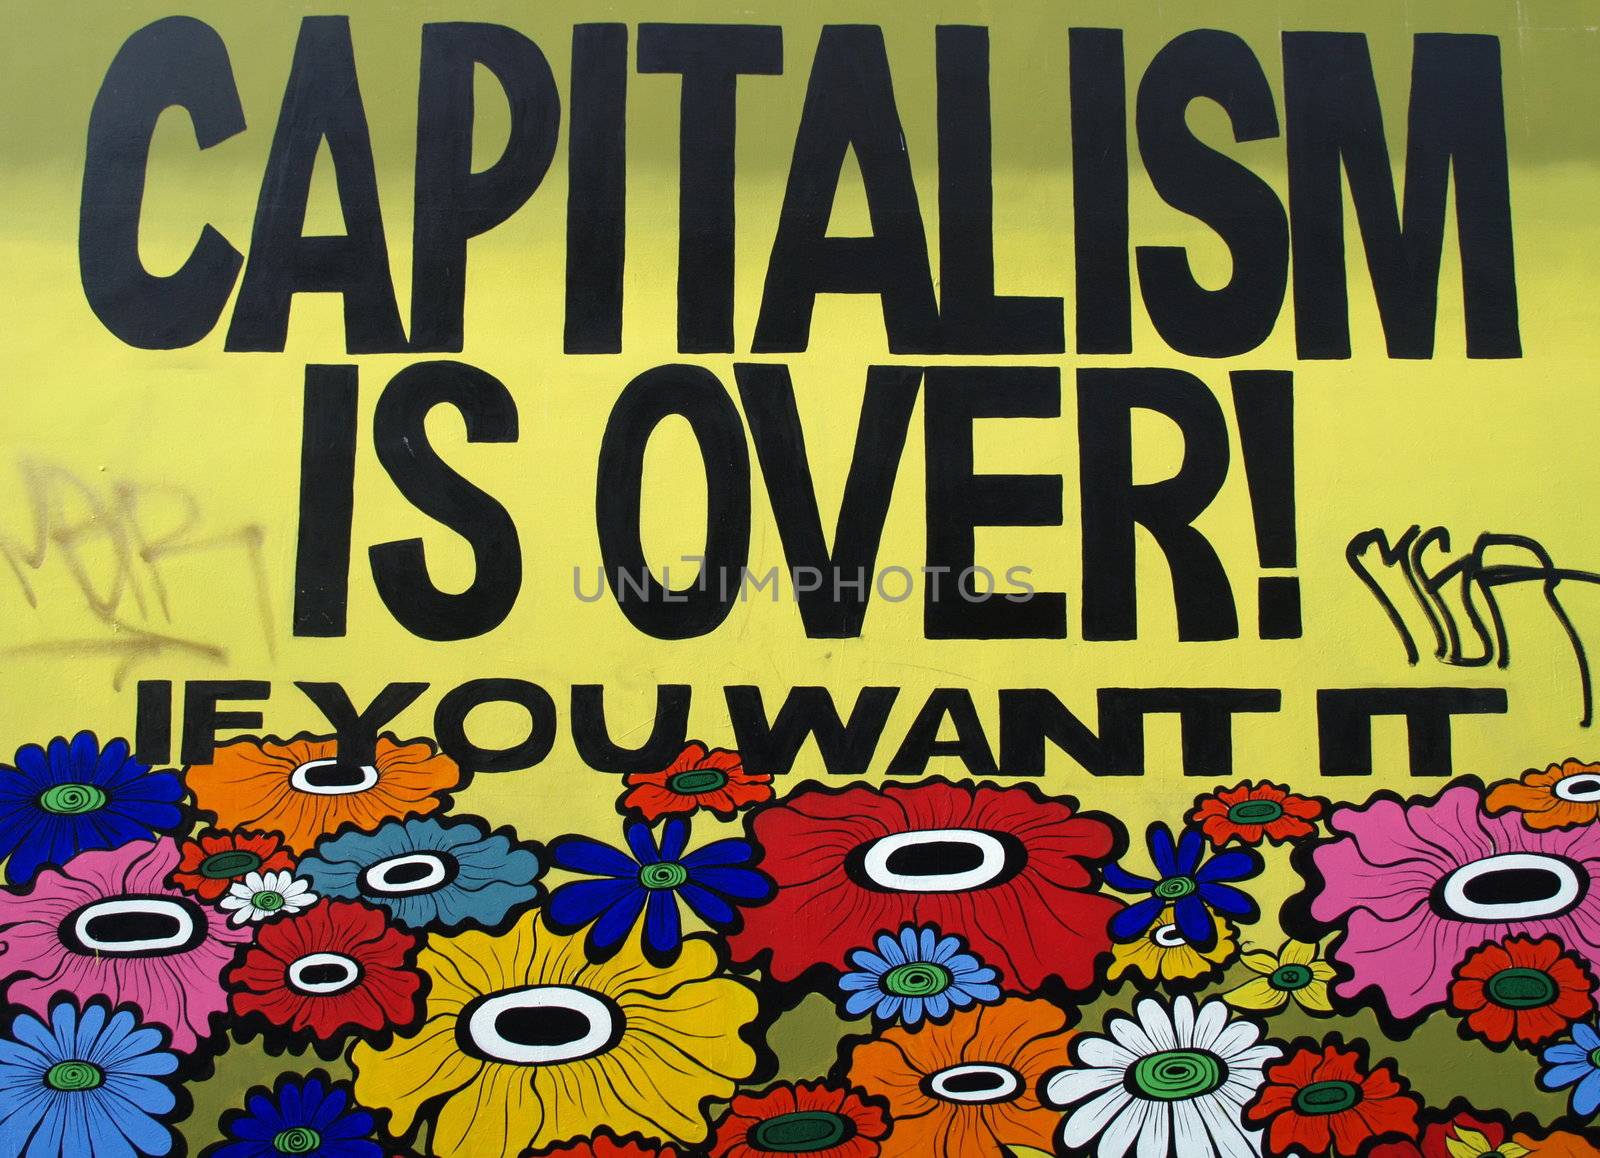 "Capitalism is over! If you want it" text on a graffiti by anderm